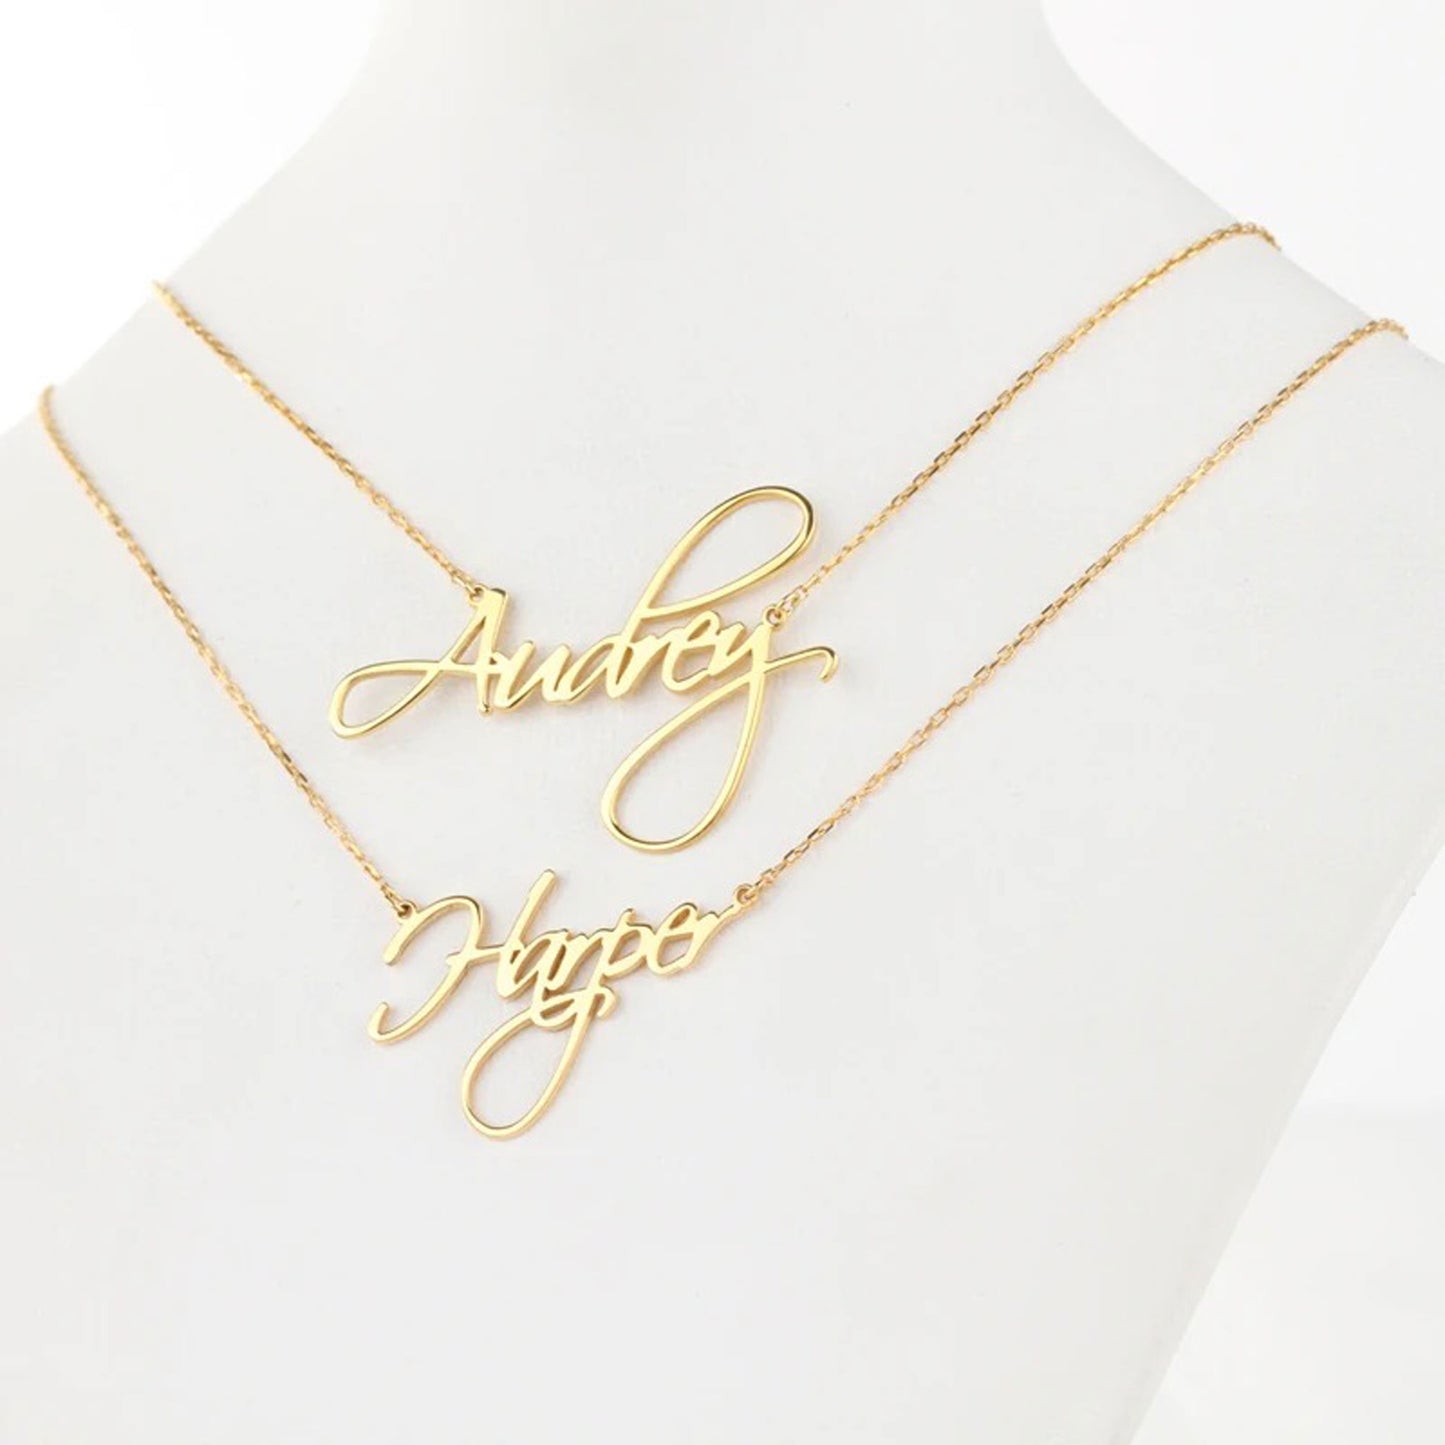 Image detail for - Gold-tone link chain and personalized script name necklace featuring Aubrey and Harper Name Samples